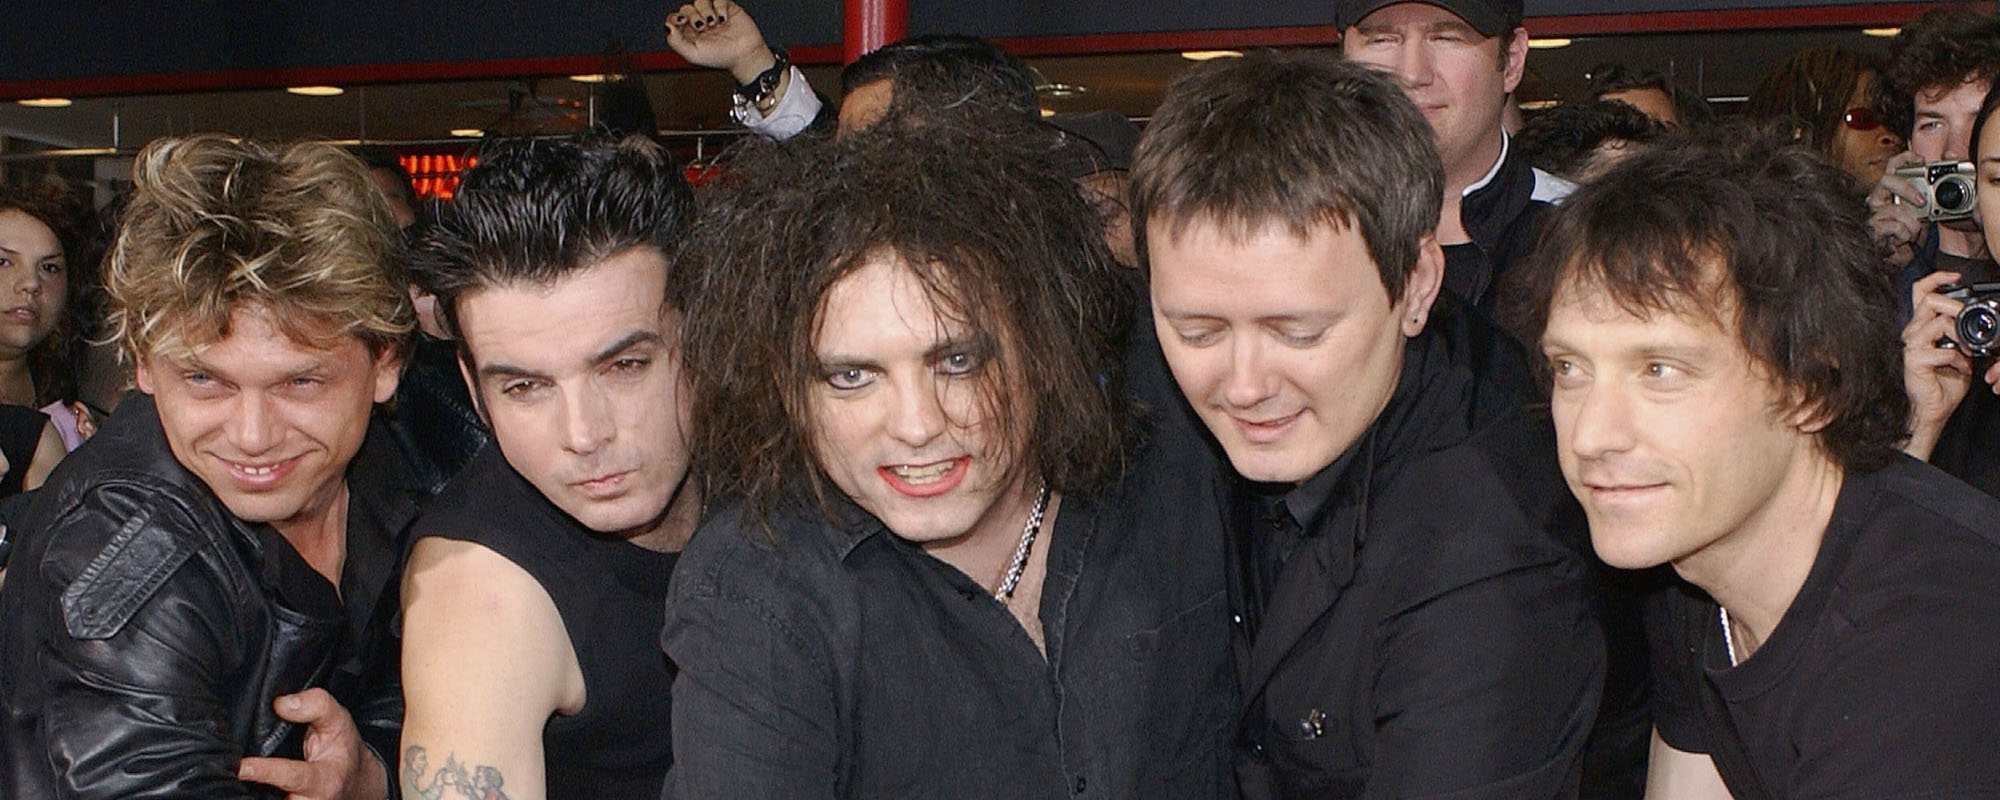 The Cure Plot North American Tour This Summer